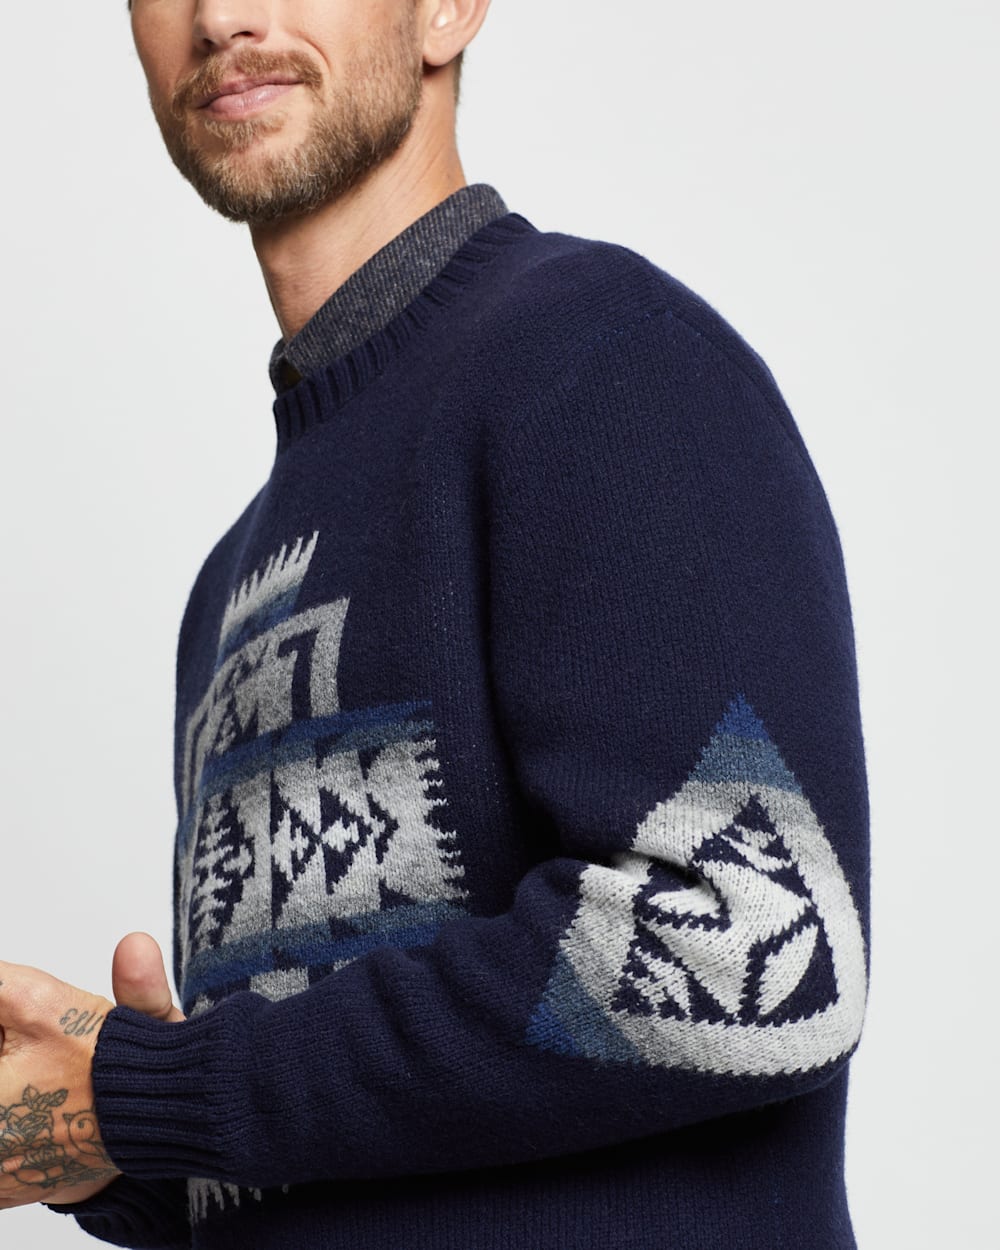 ALTERNATE VIEW OF MEN'S LAMBSWOOL GRAPHIC SWEATER IN BLUE CHIEF JOSEPH image number 3